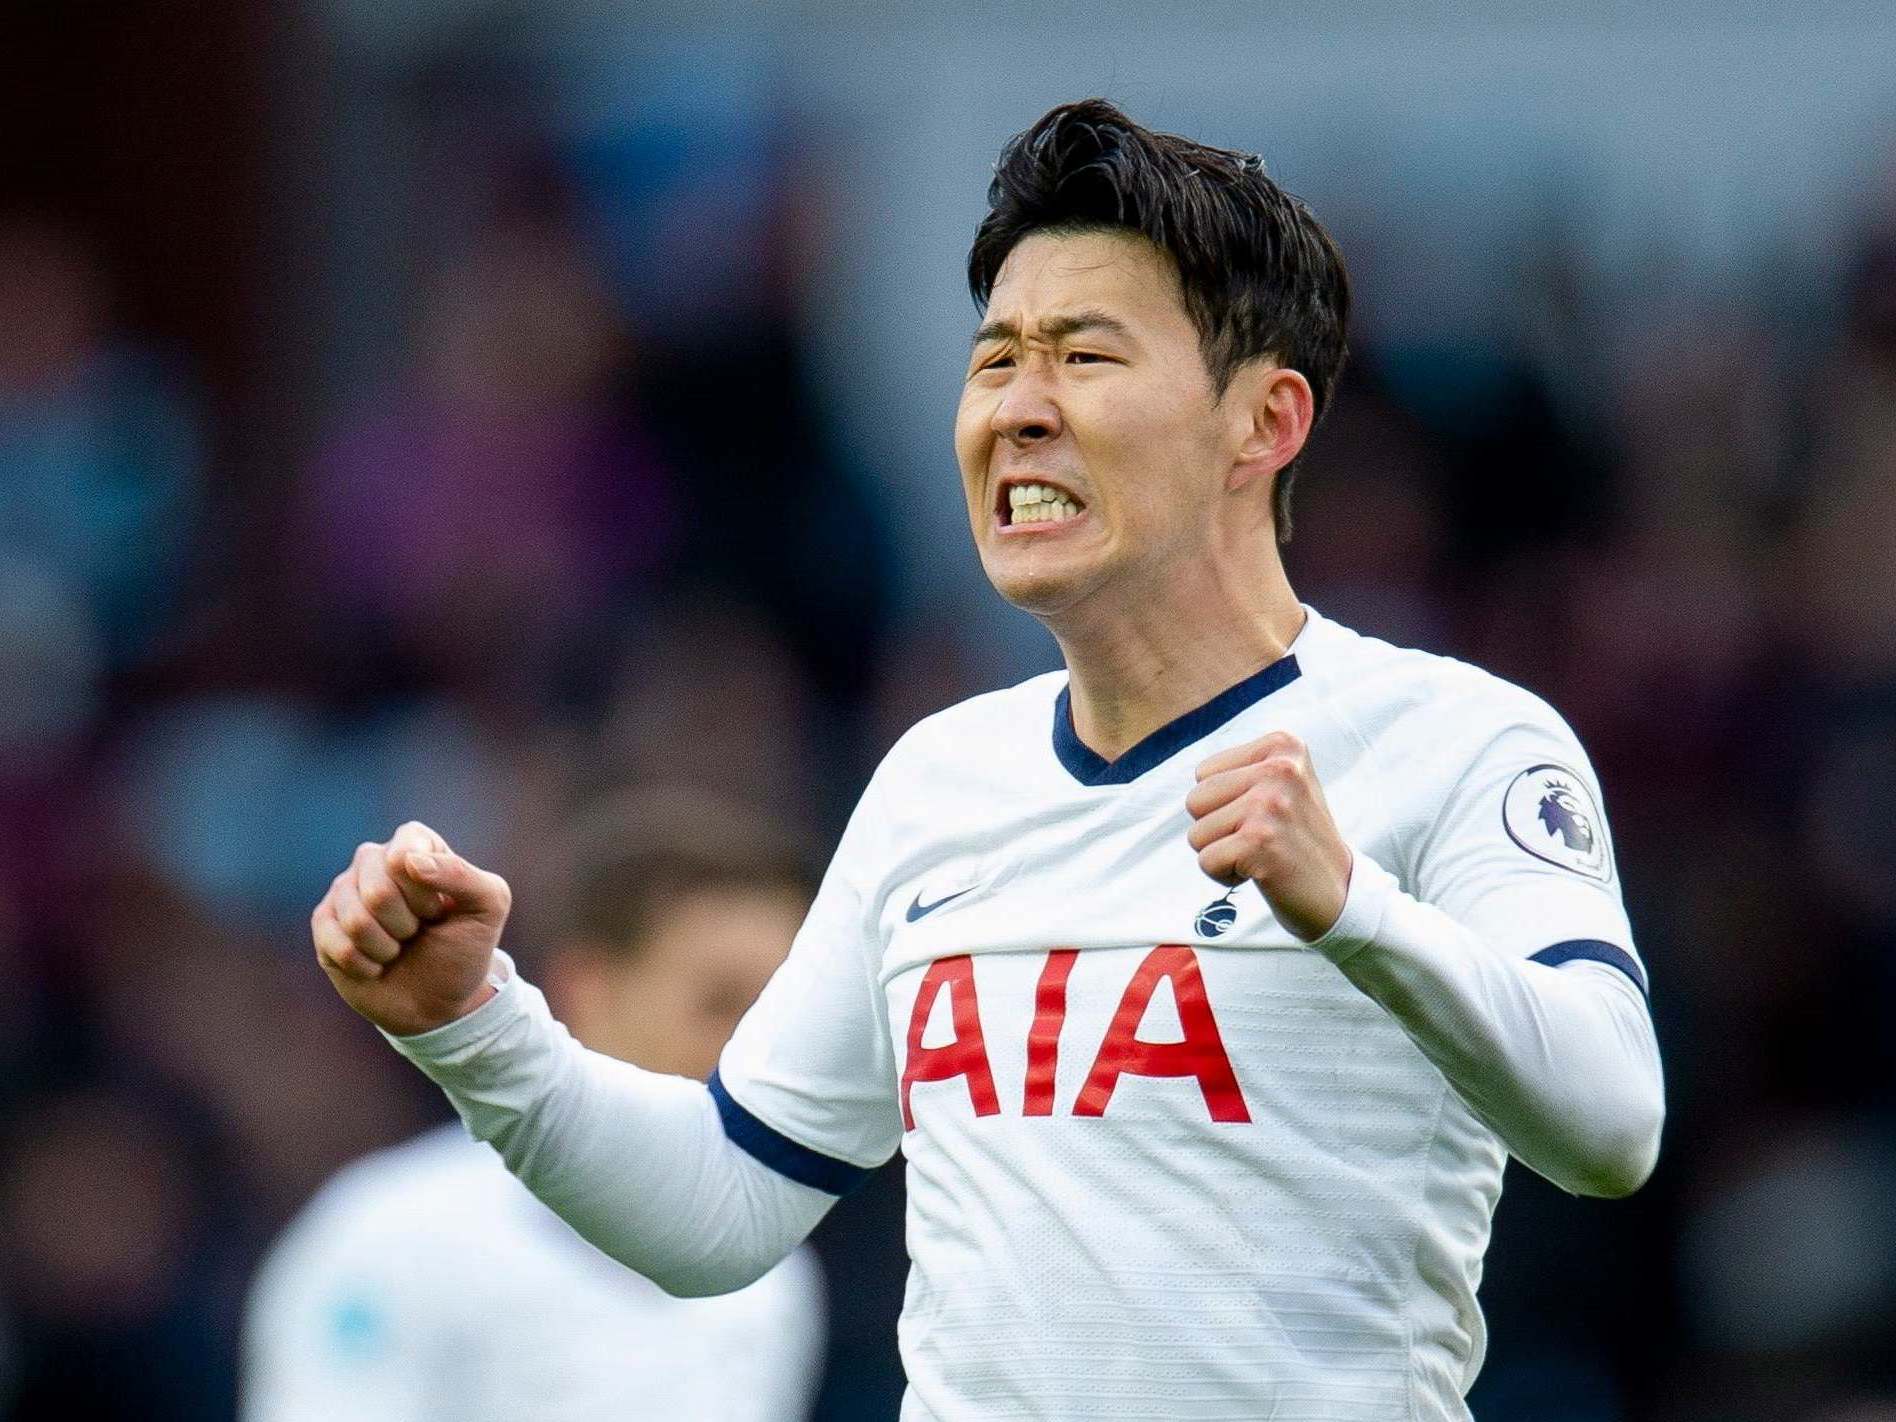 Son Heung-min suffered a fractured arm Tottenham's win over Aston Villa and will miss several weeks after surgery